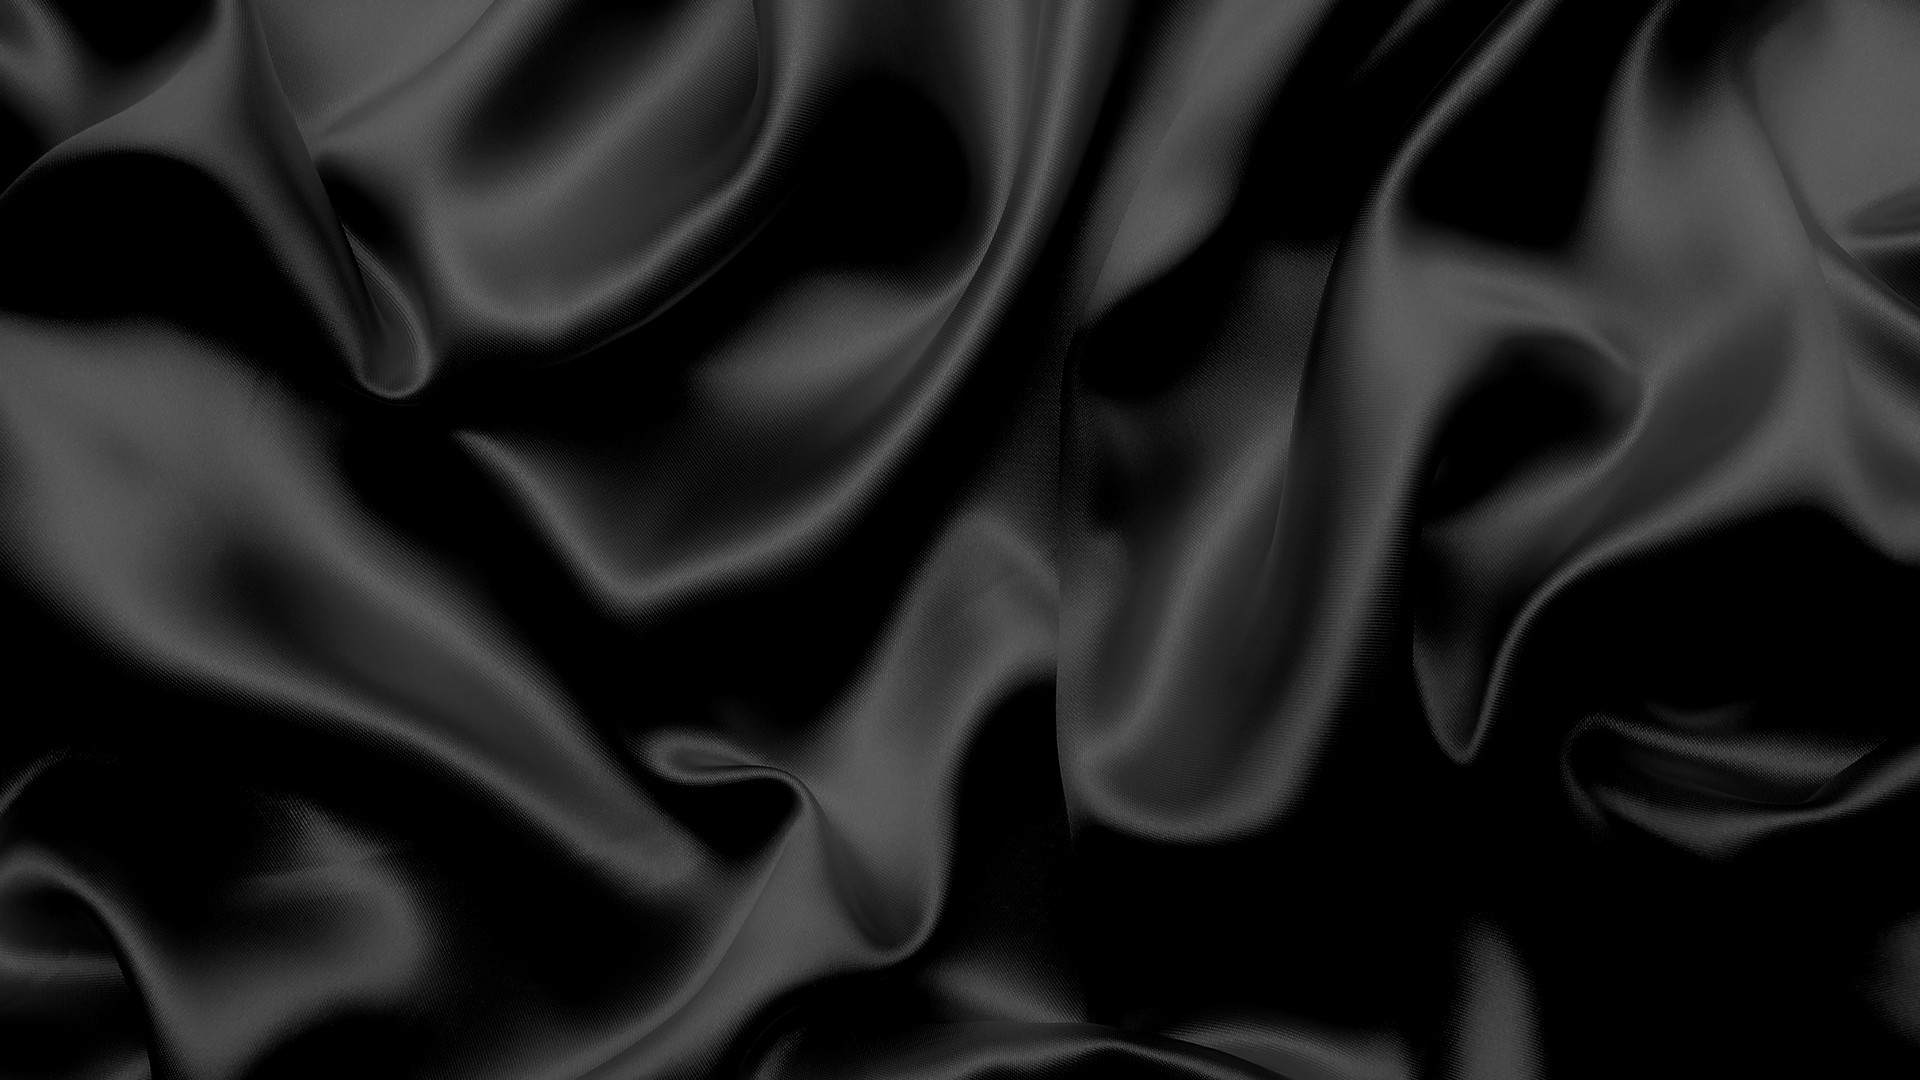 Black Silk iPhone Wallpaper Design with high-resolution 1920x1080 pixel. You can set as wallpaper for Apple iPhone X, XS Max, XR, 8, 7, 6, SE, iPad. Enjoy and share your favorite HD wallpapers and background images